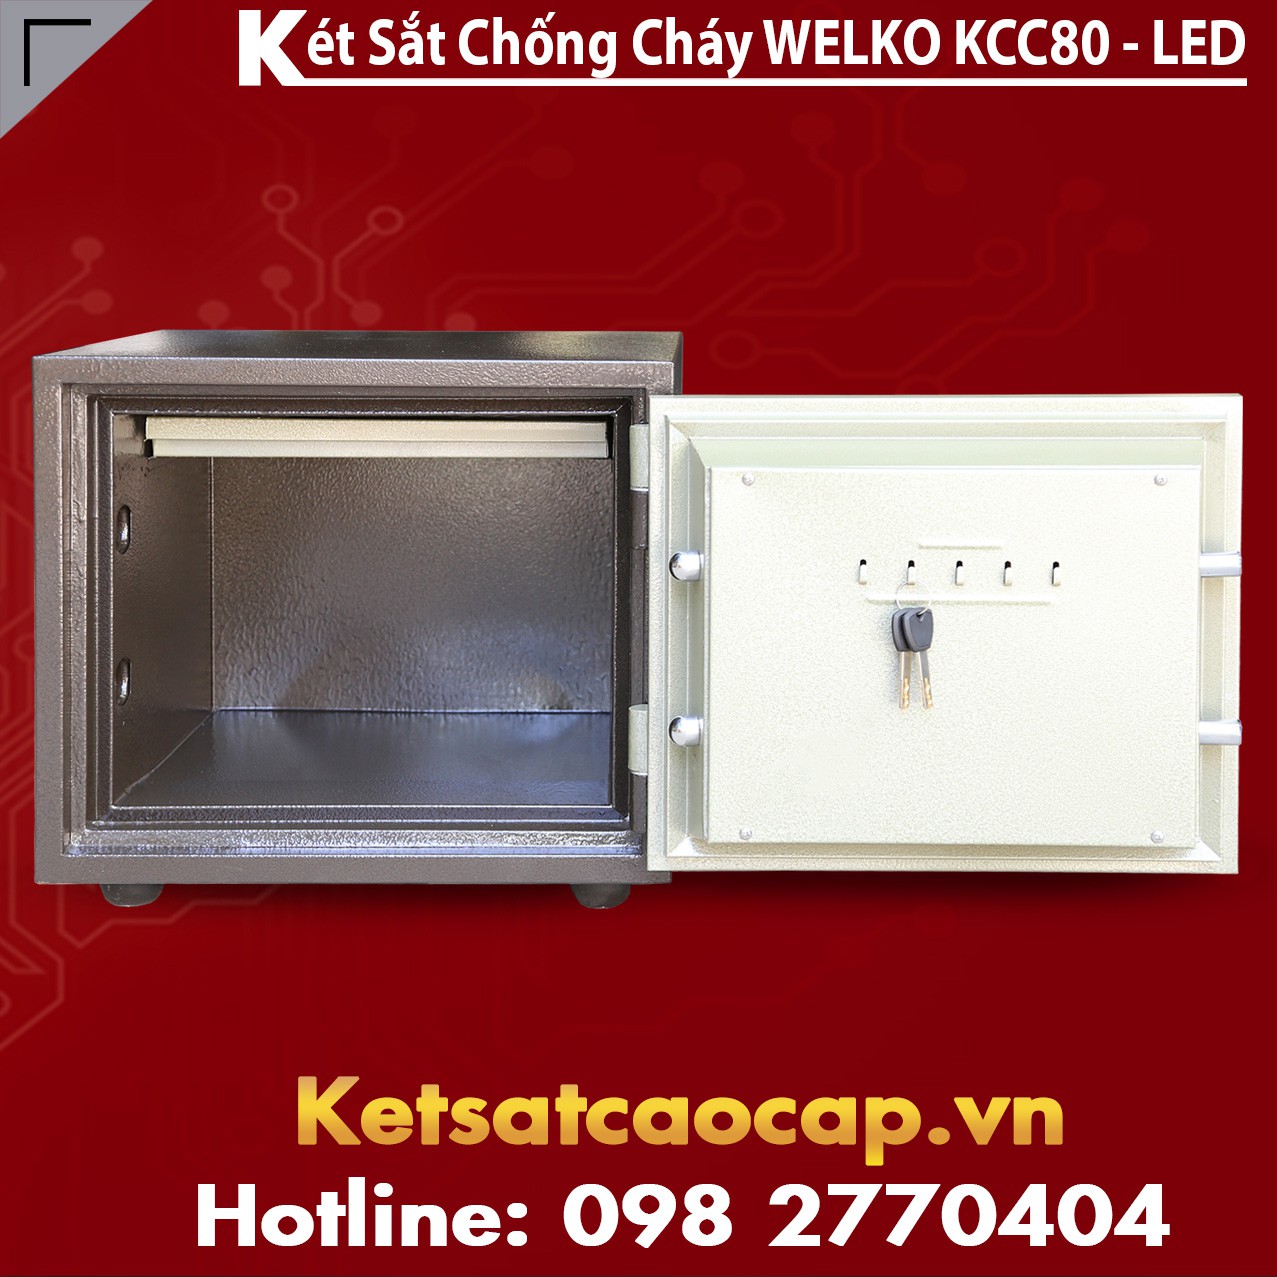 Best Seller Safes Suppliers and Exporters Co So San Xuat Ket Sat Binh Duong Chinh Hang